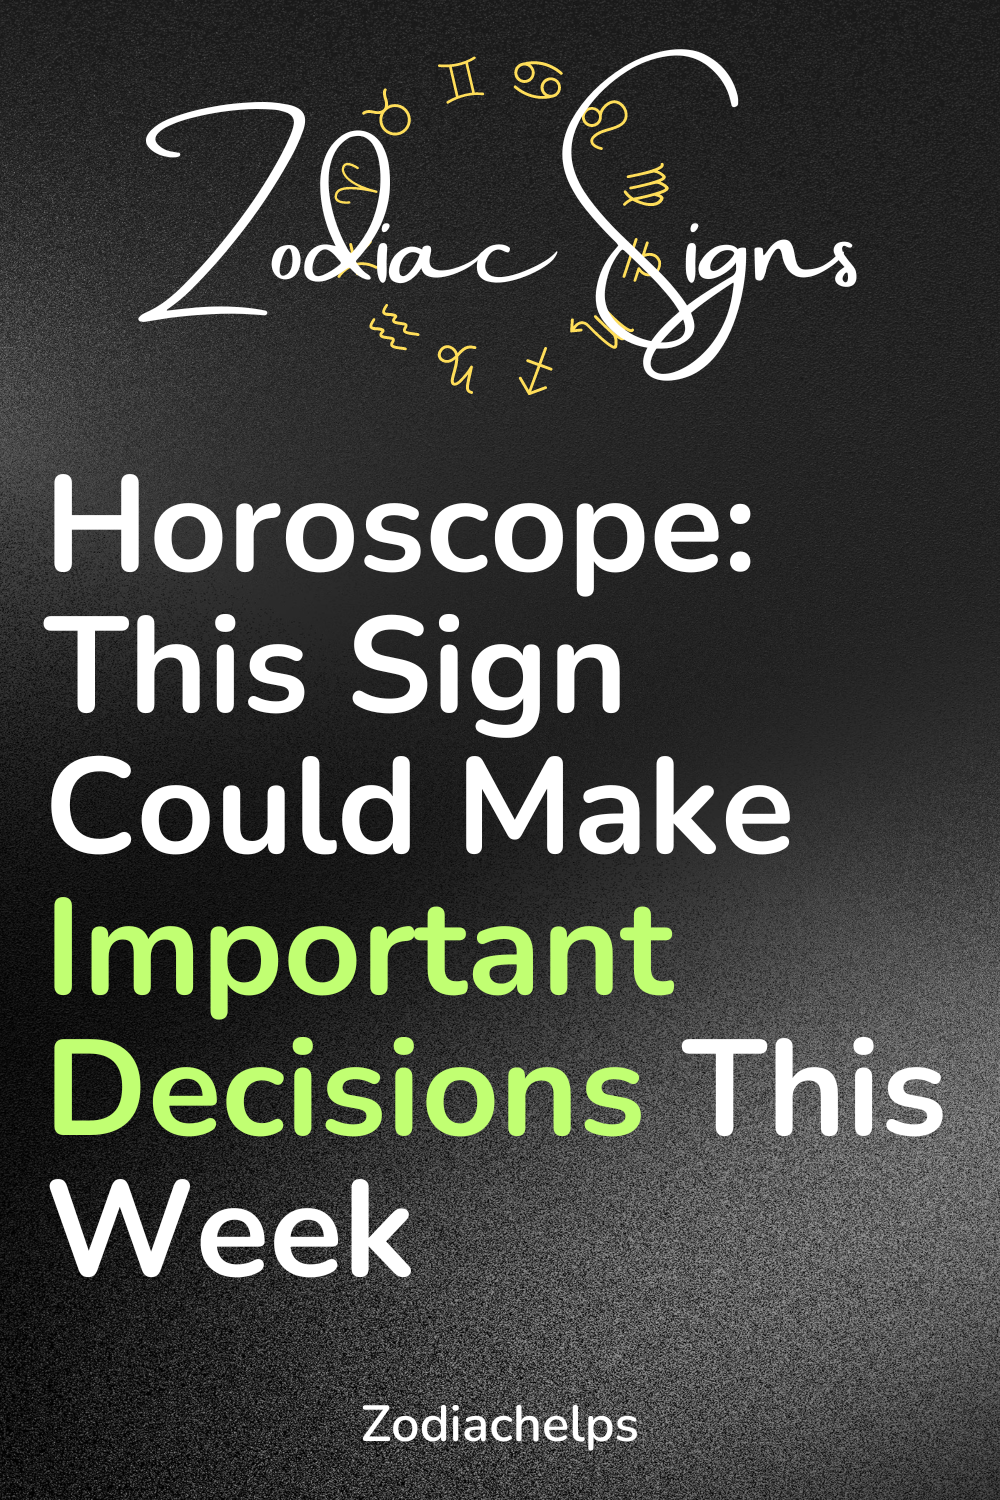 Horoscope: This Sign Could Make Important Decisions This Week